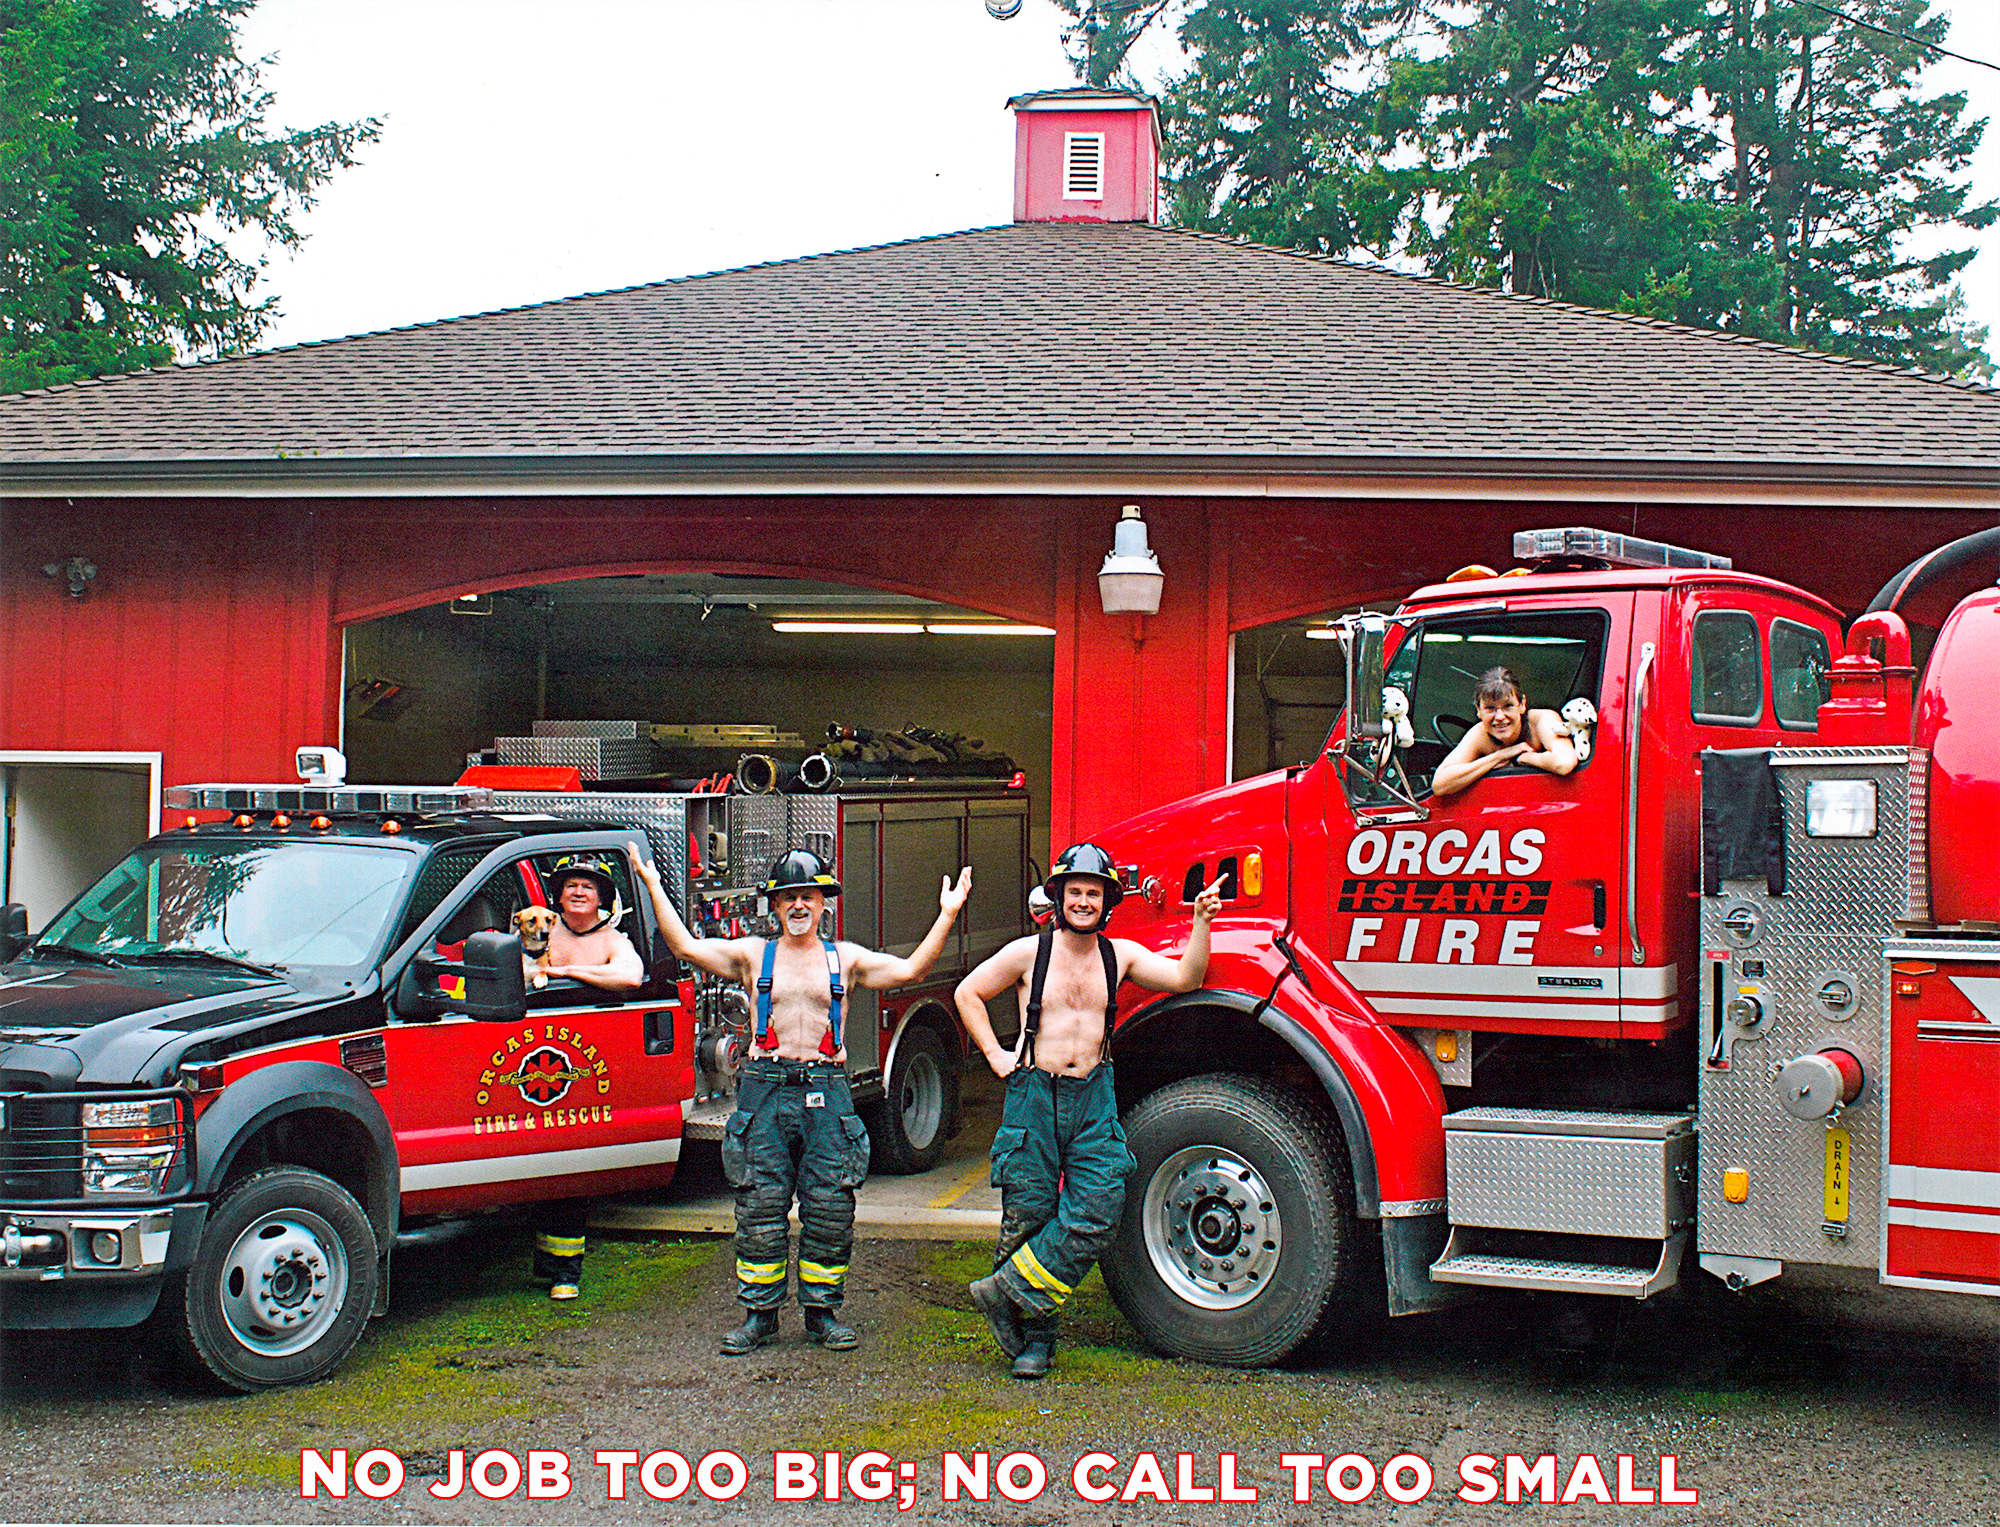 Orcas Fire and Rescue staff stars in nearly nude calendar